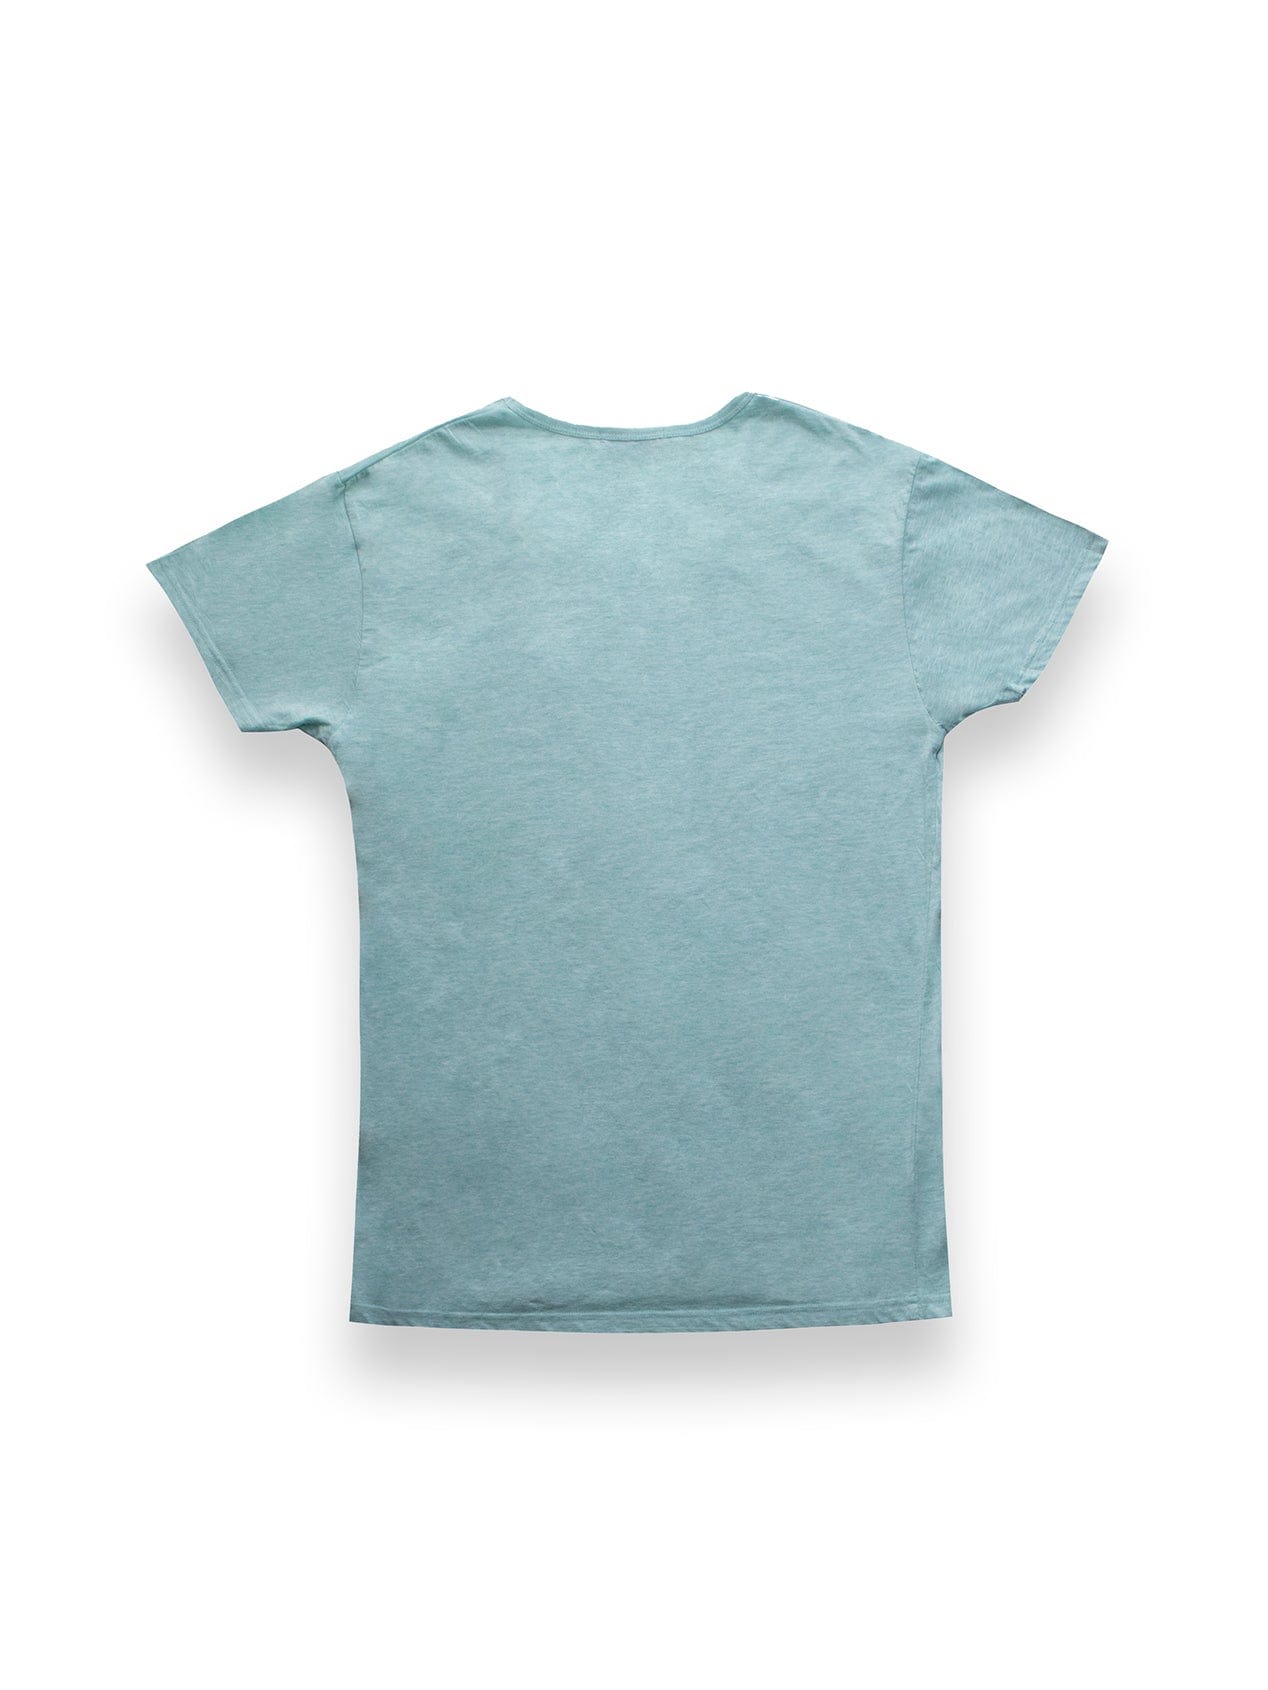 Turquoise Light Weight Cotton T-Shirt